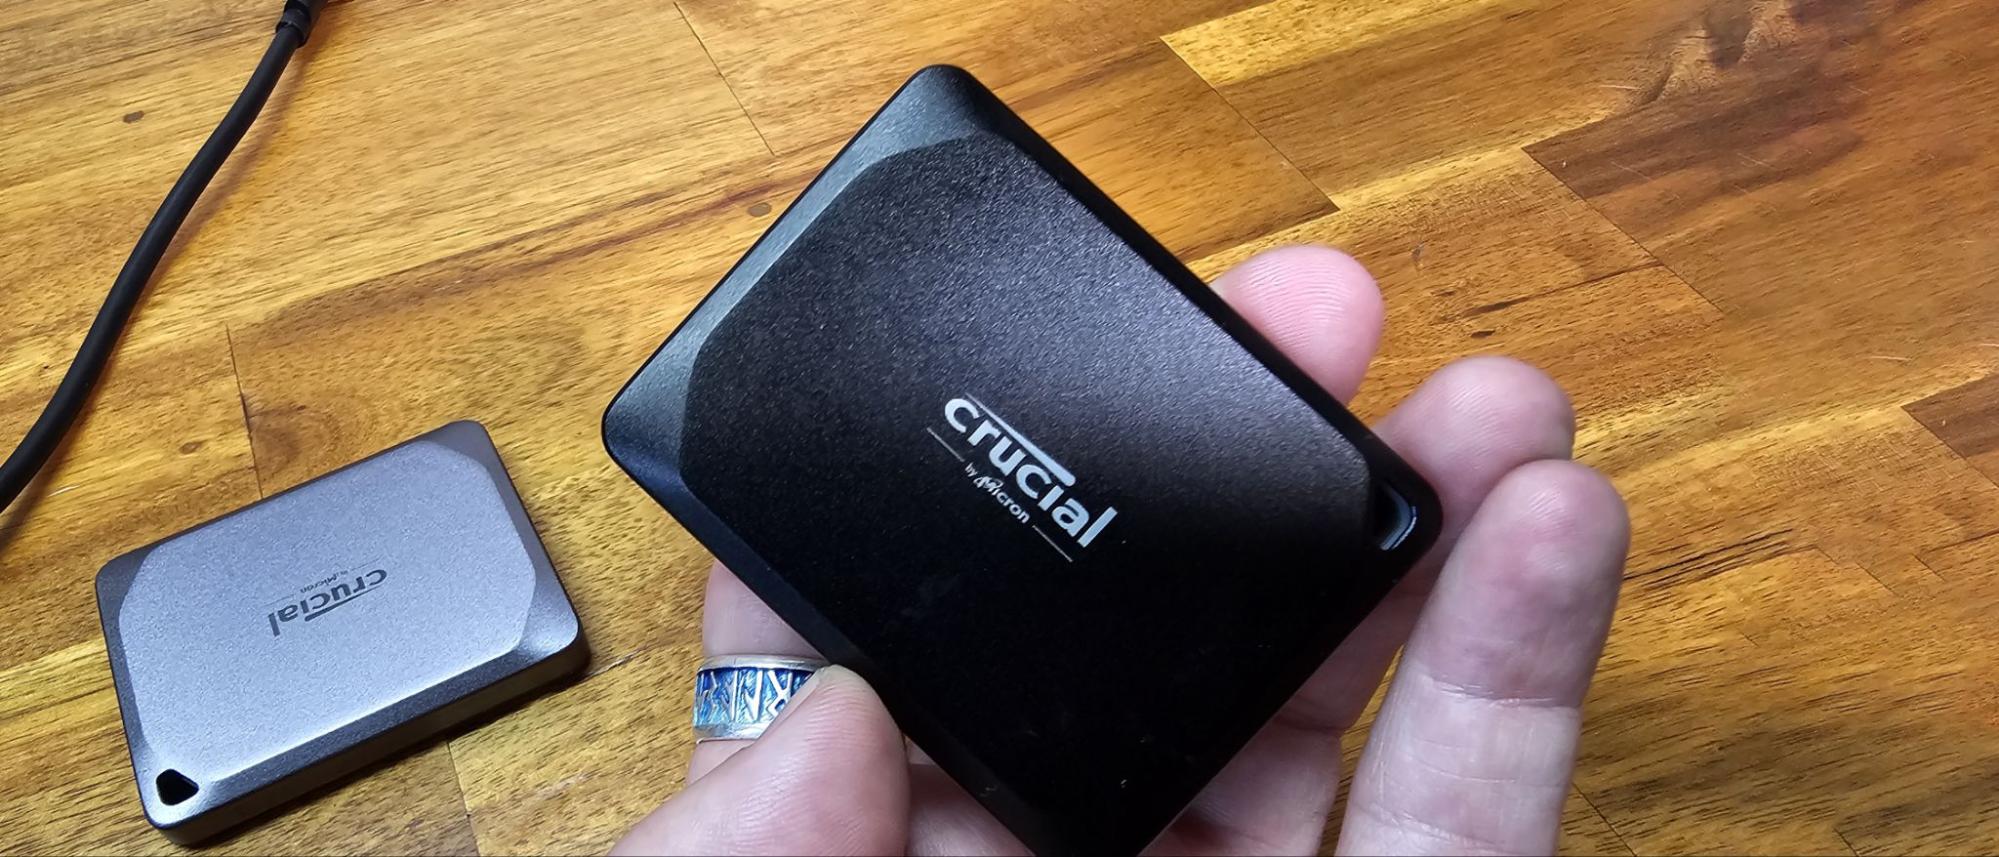  Crucial X10 Pro 2TB Portable Solid State Drive